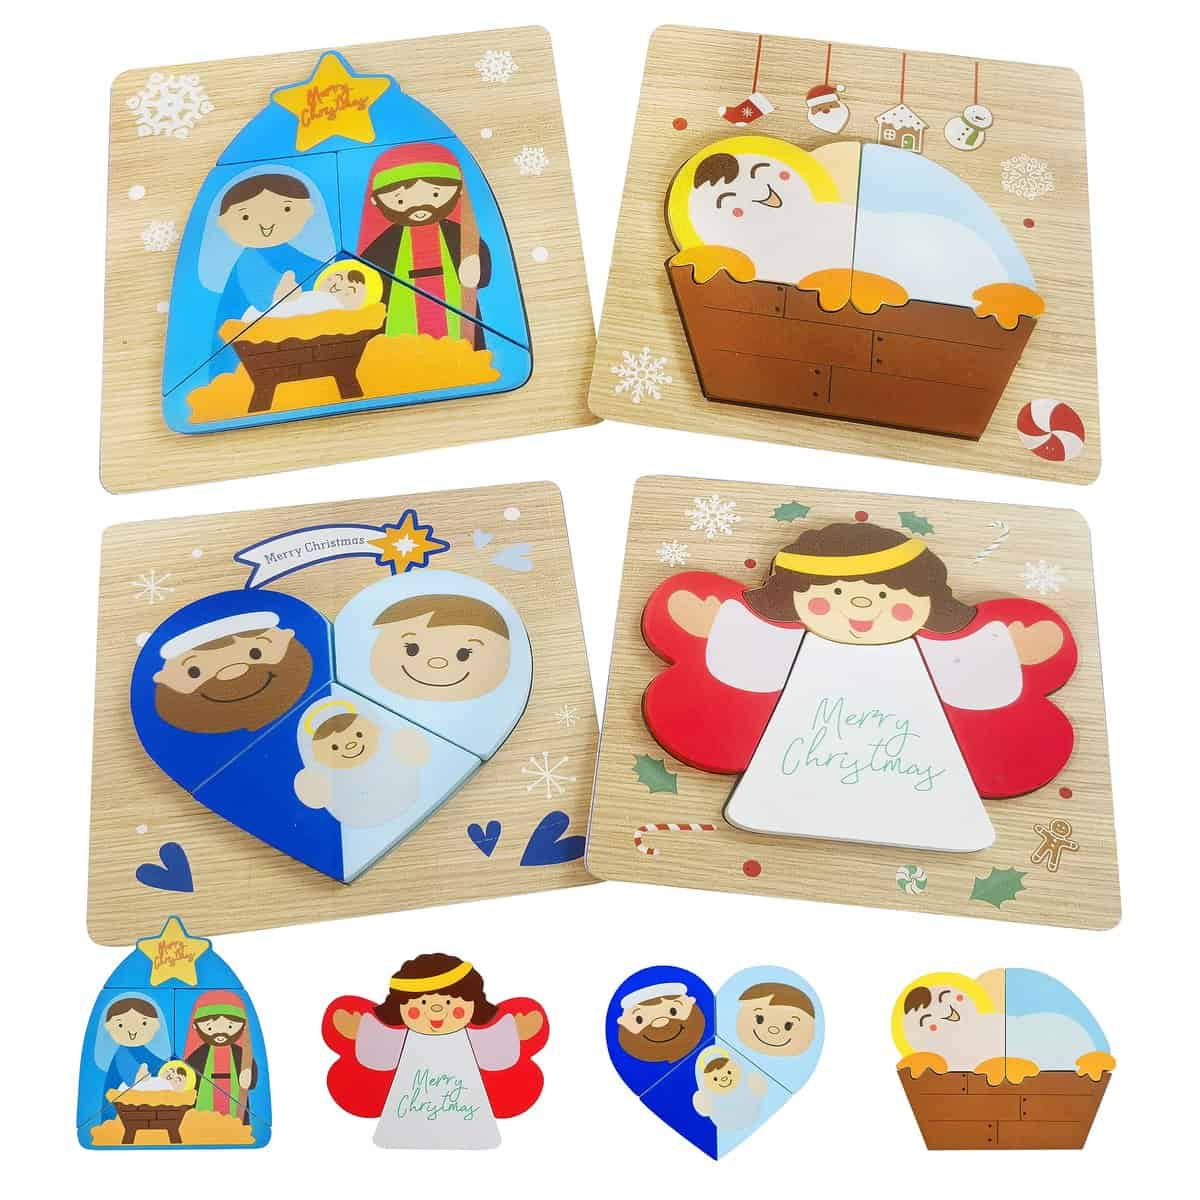 Cherislpy Christmas Manger Wooden Puzzles